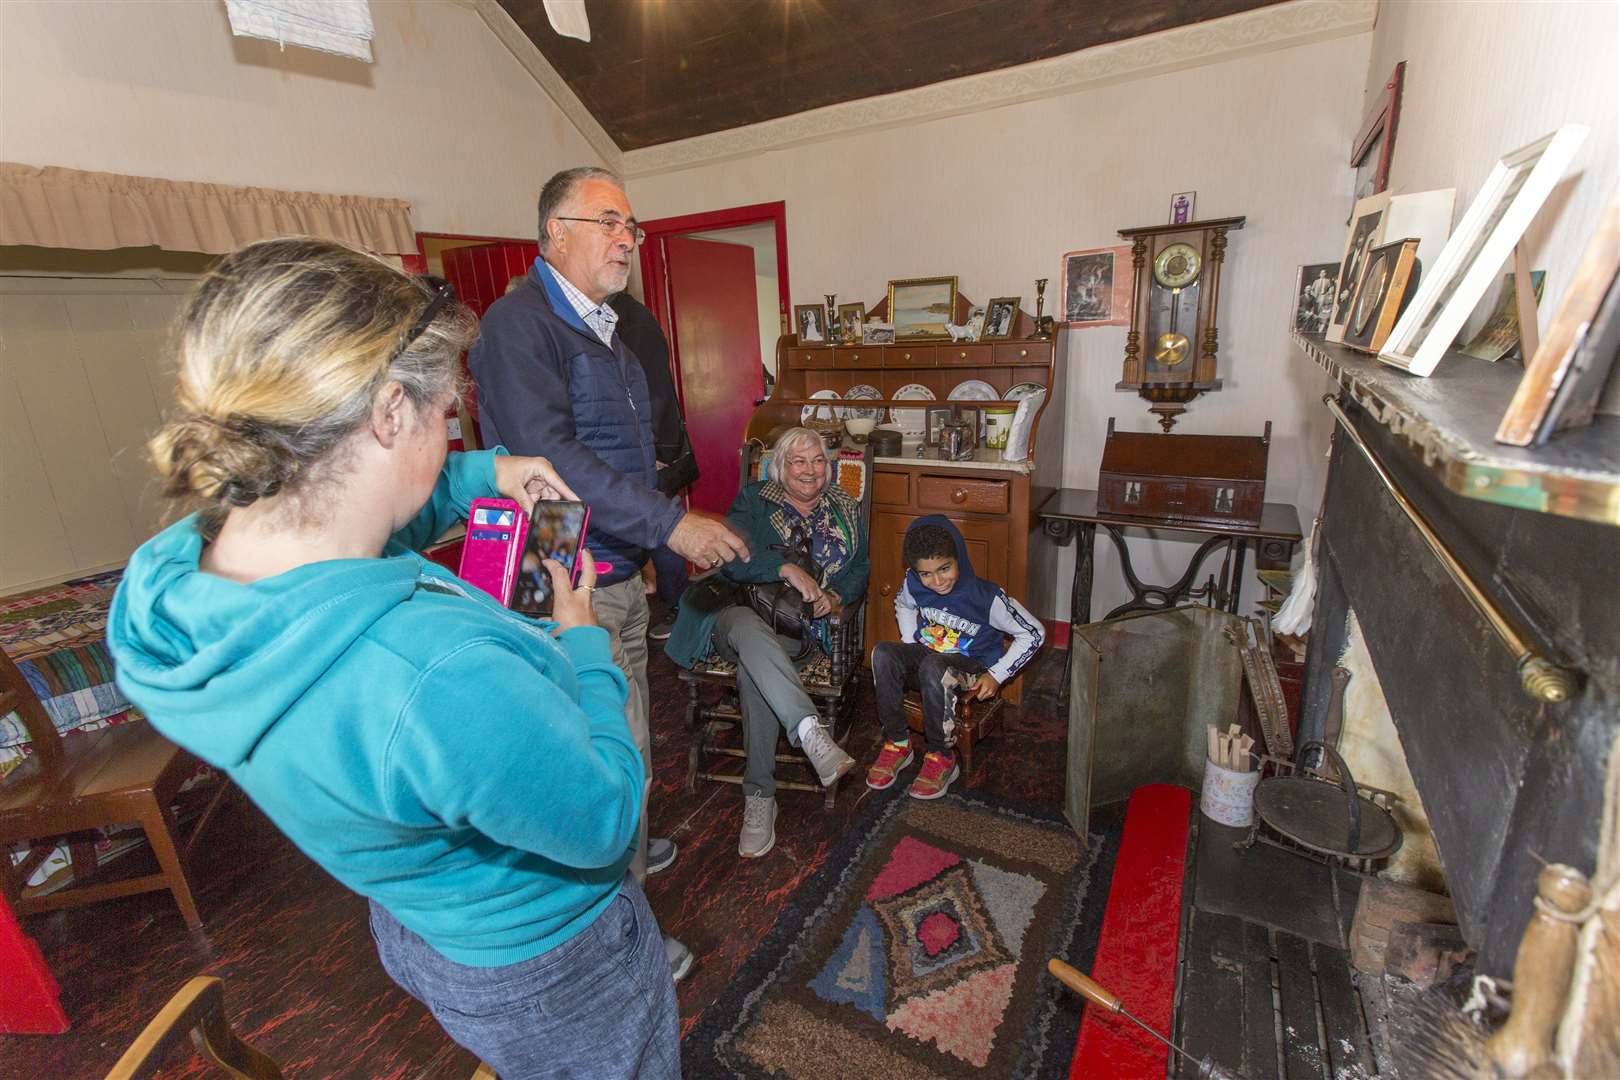 Mary Ann's granddaughter Anne Fitzsimmons and great-great-grandson Charlie Fitzsimmons (both seated) pose for a photo in the cottage's living room, taken by great-granddaughter Claire Fitzsimmons, while her dad Jim looks on. Picture: Robert MacDonald / Northern Studios